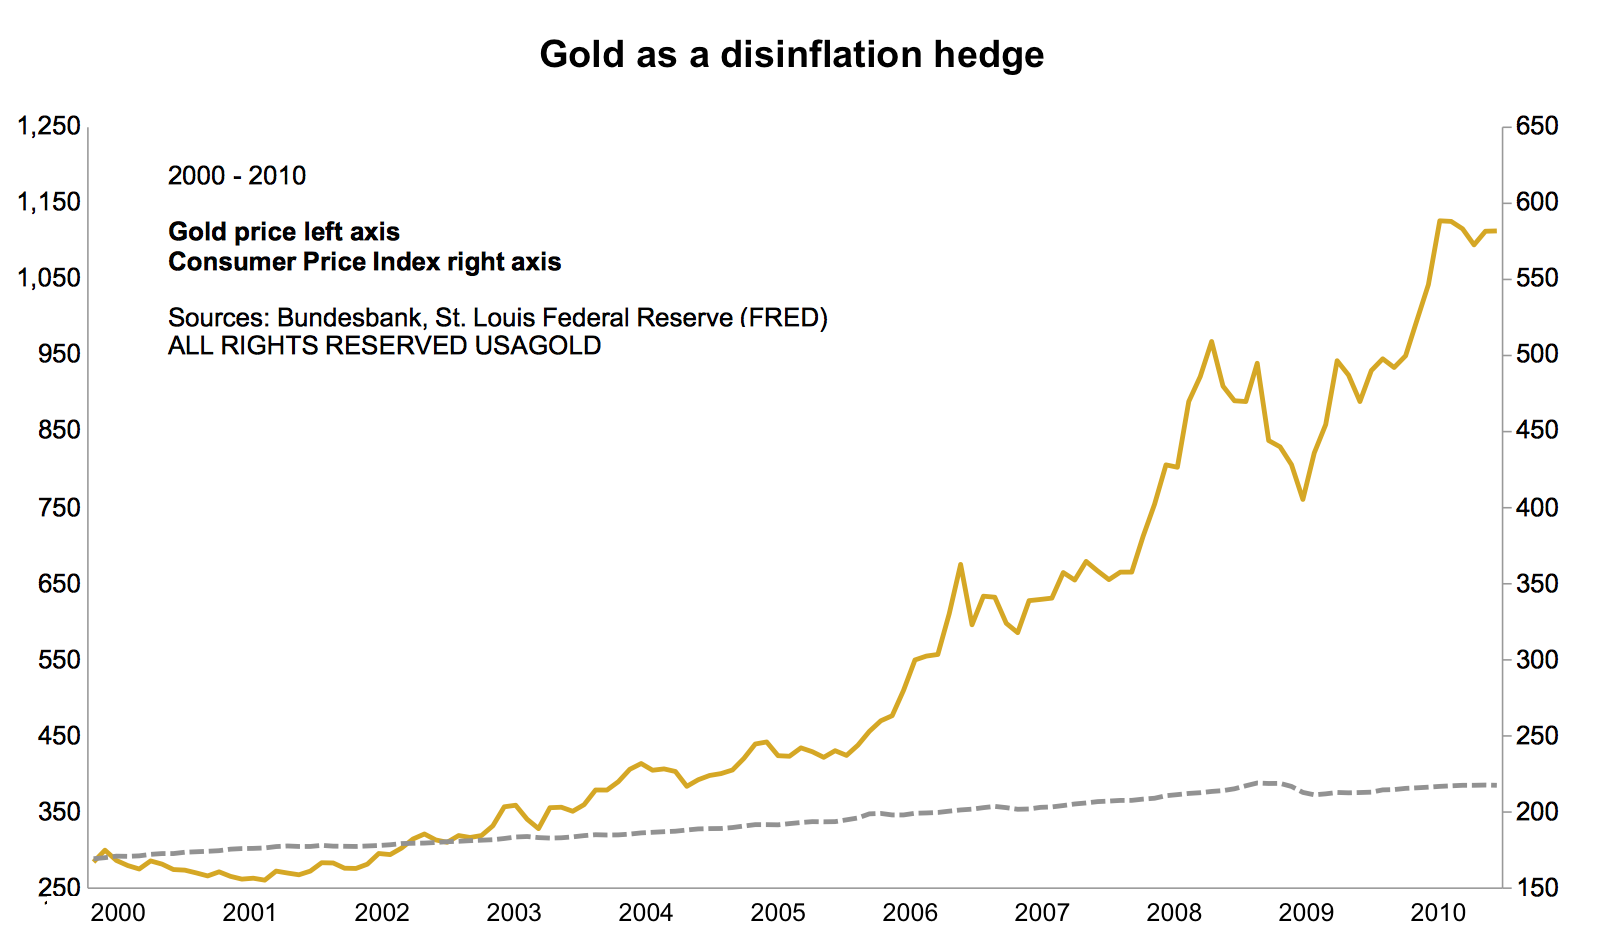 overlay chart showing gold's performance during the disinflation period following the 2008 financial meltdown